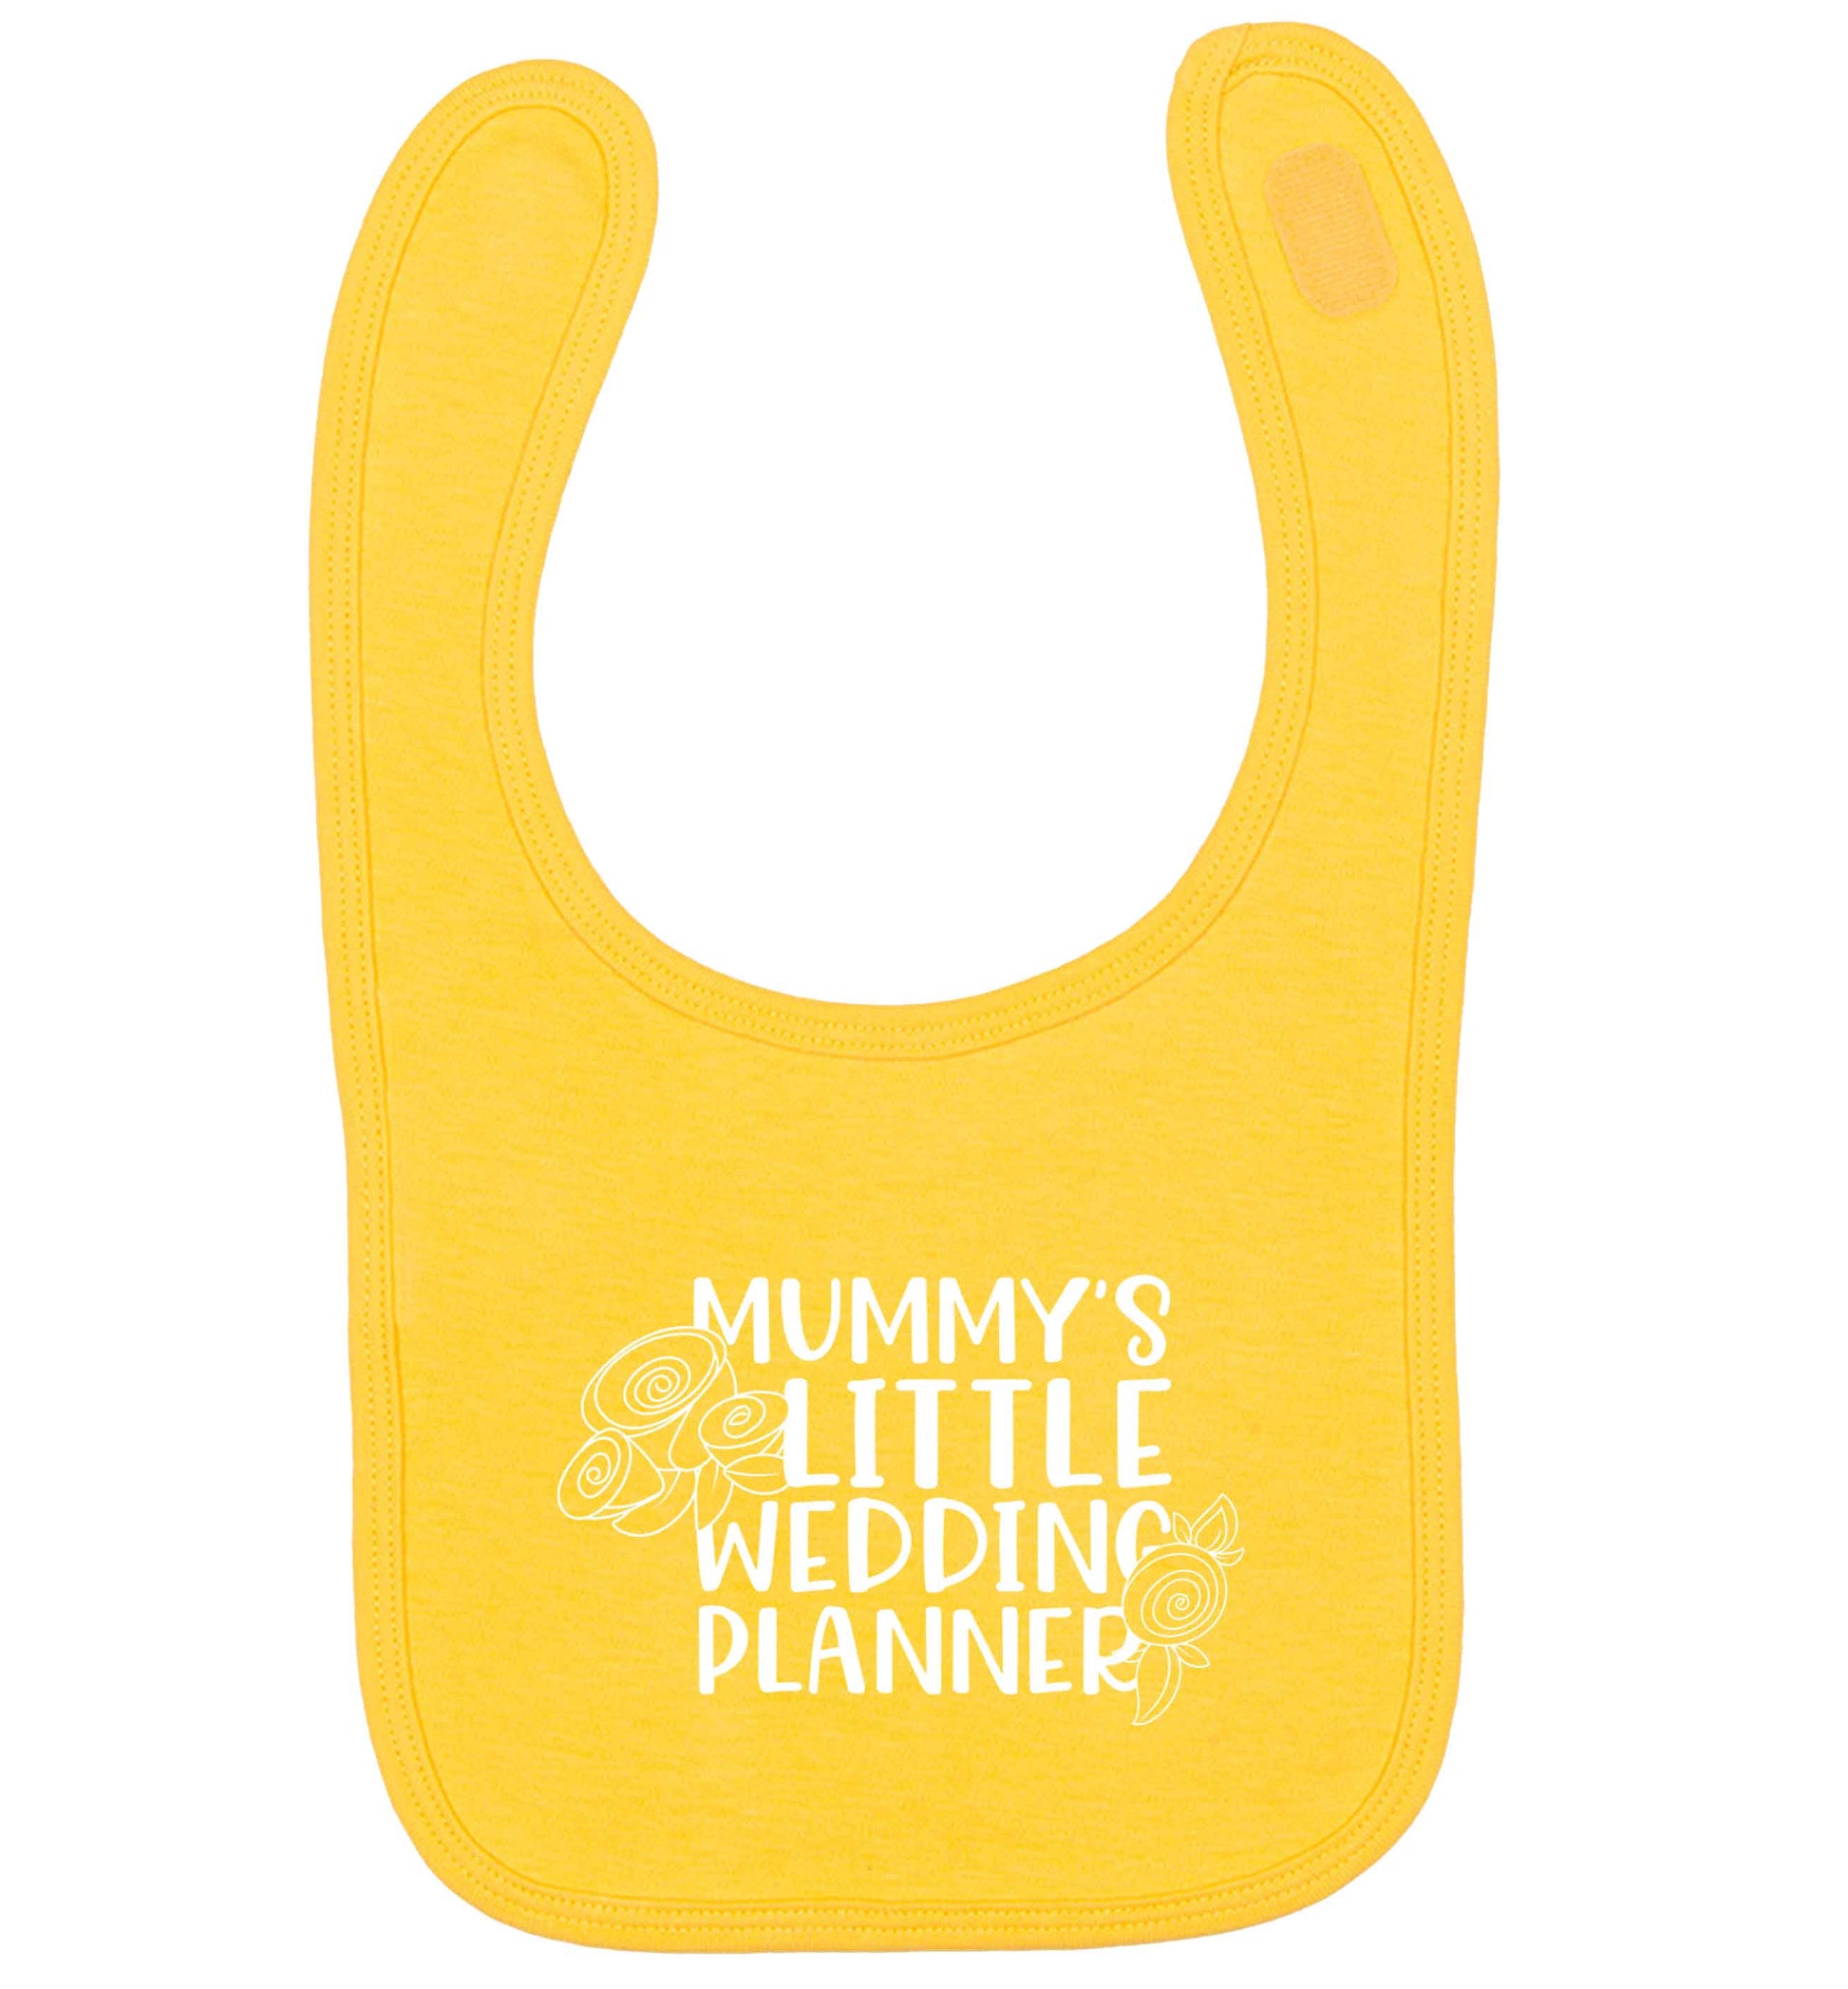 adorable wedding themed gifts for your mini wedding planner! yellow baby bib